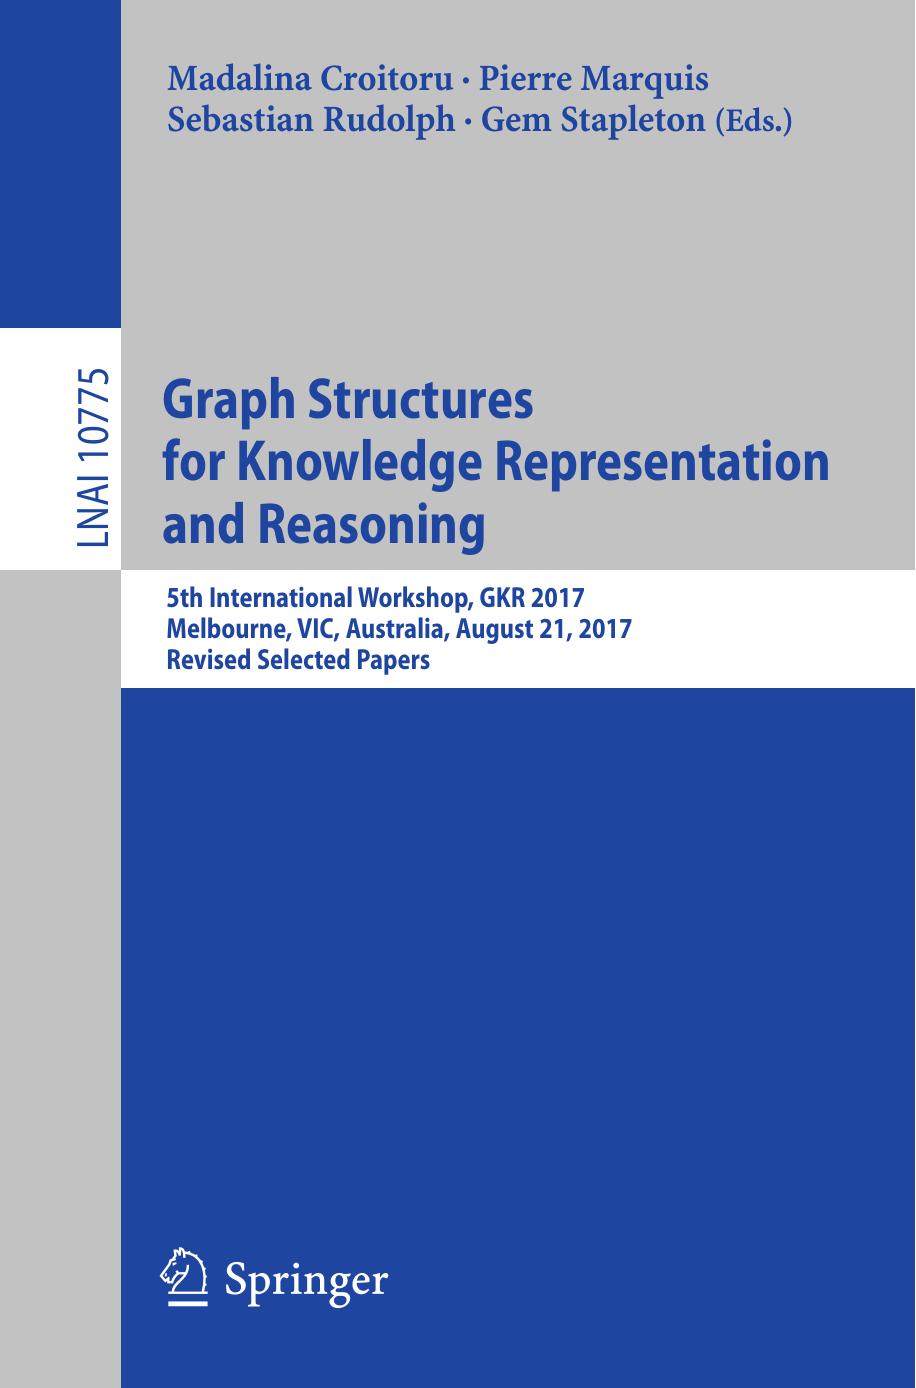 Graph Structures for Knowledge Representation and Reasoning: 5th International Workshop, GKR 2017, Melbourne, VIC, Australia, August 21, 2017, Revised Selected Papers